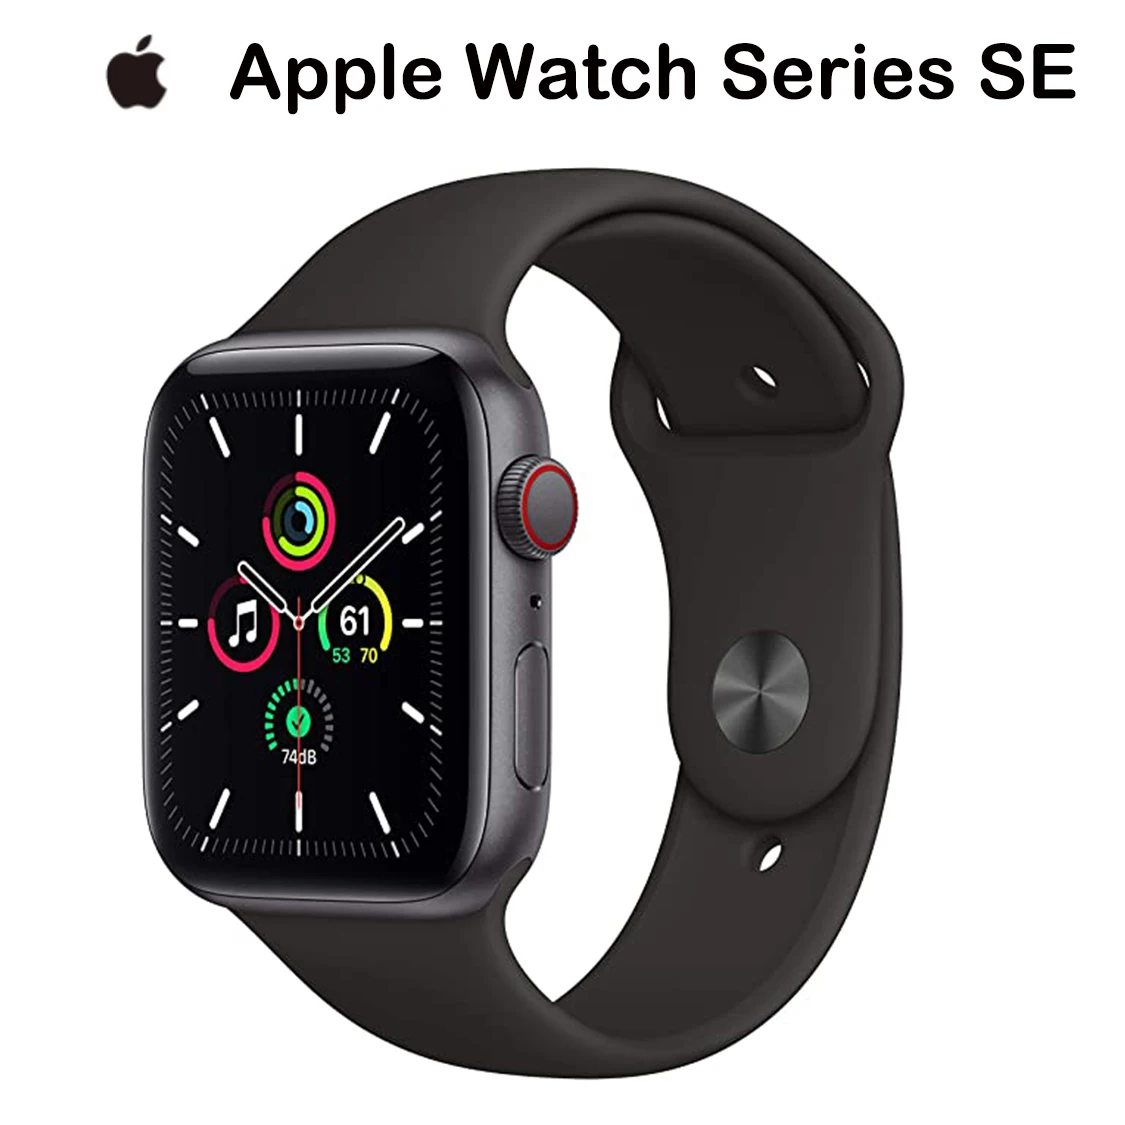 Permalink to New Apple Watch SE (GPS + Cellular 40/44mm) – Space Gray Aluminum Case with Black Sport Band and with Charcoal Sport Loop